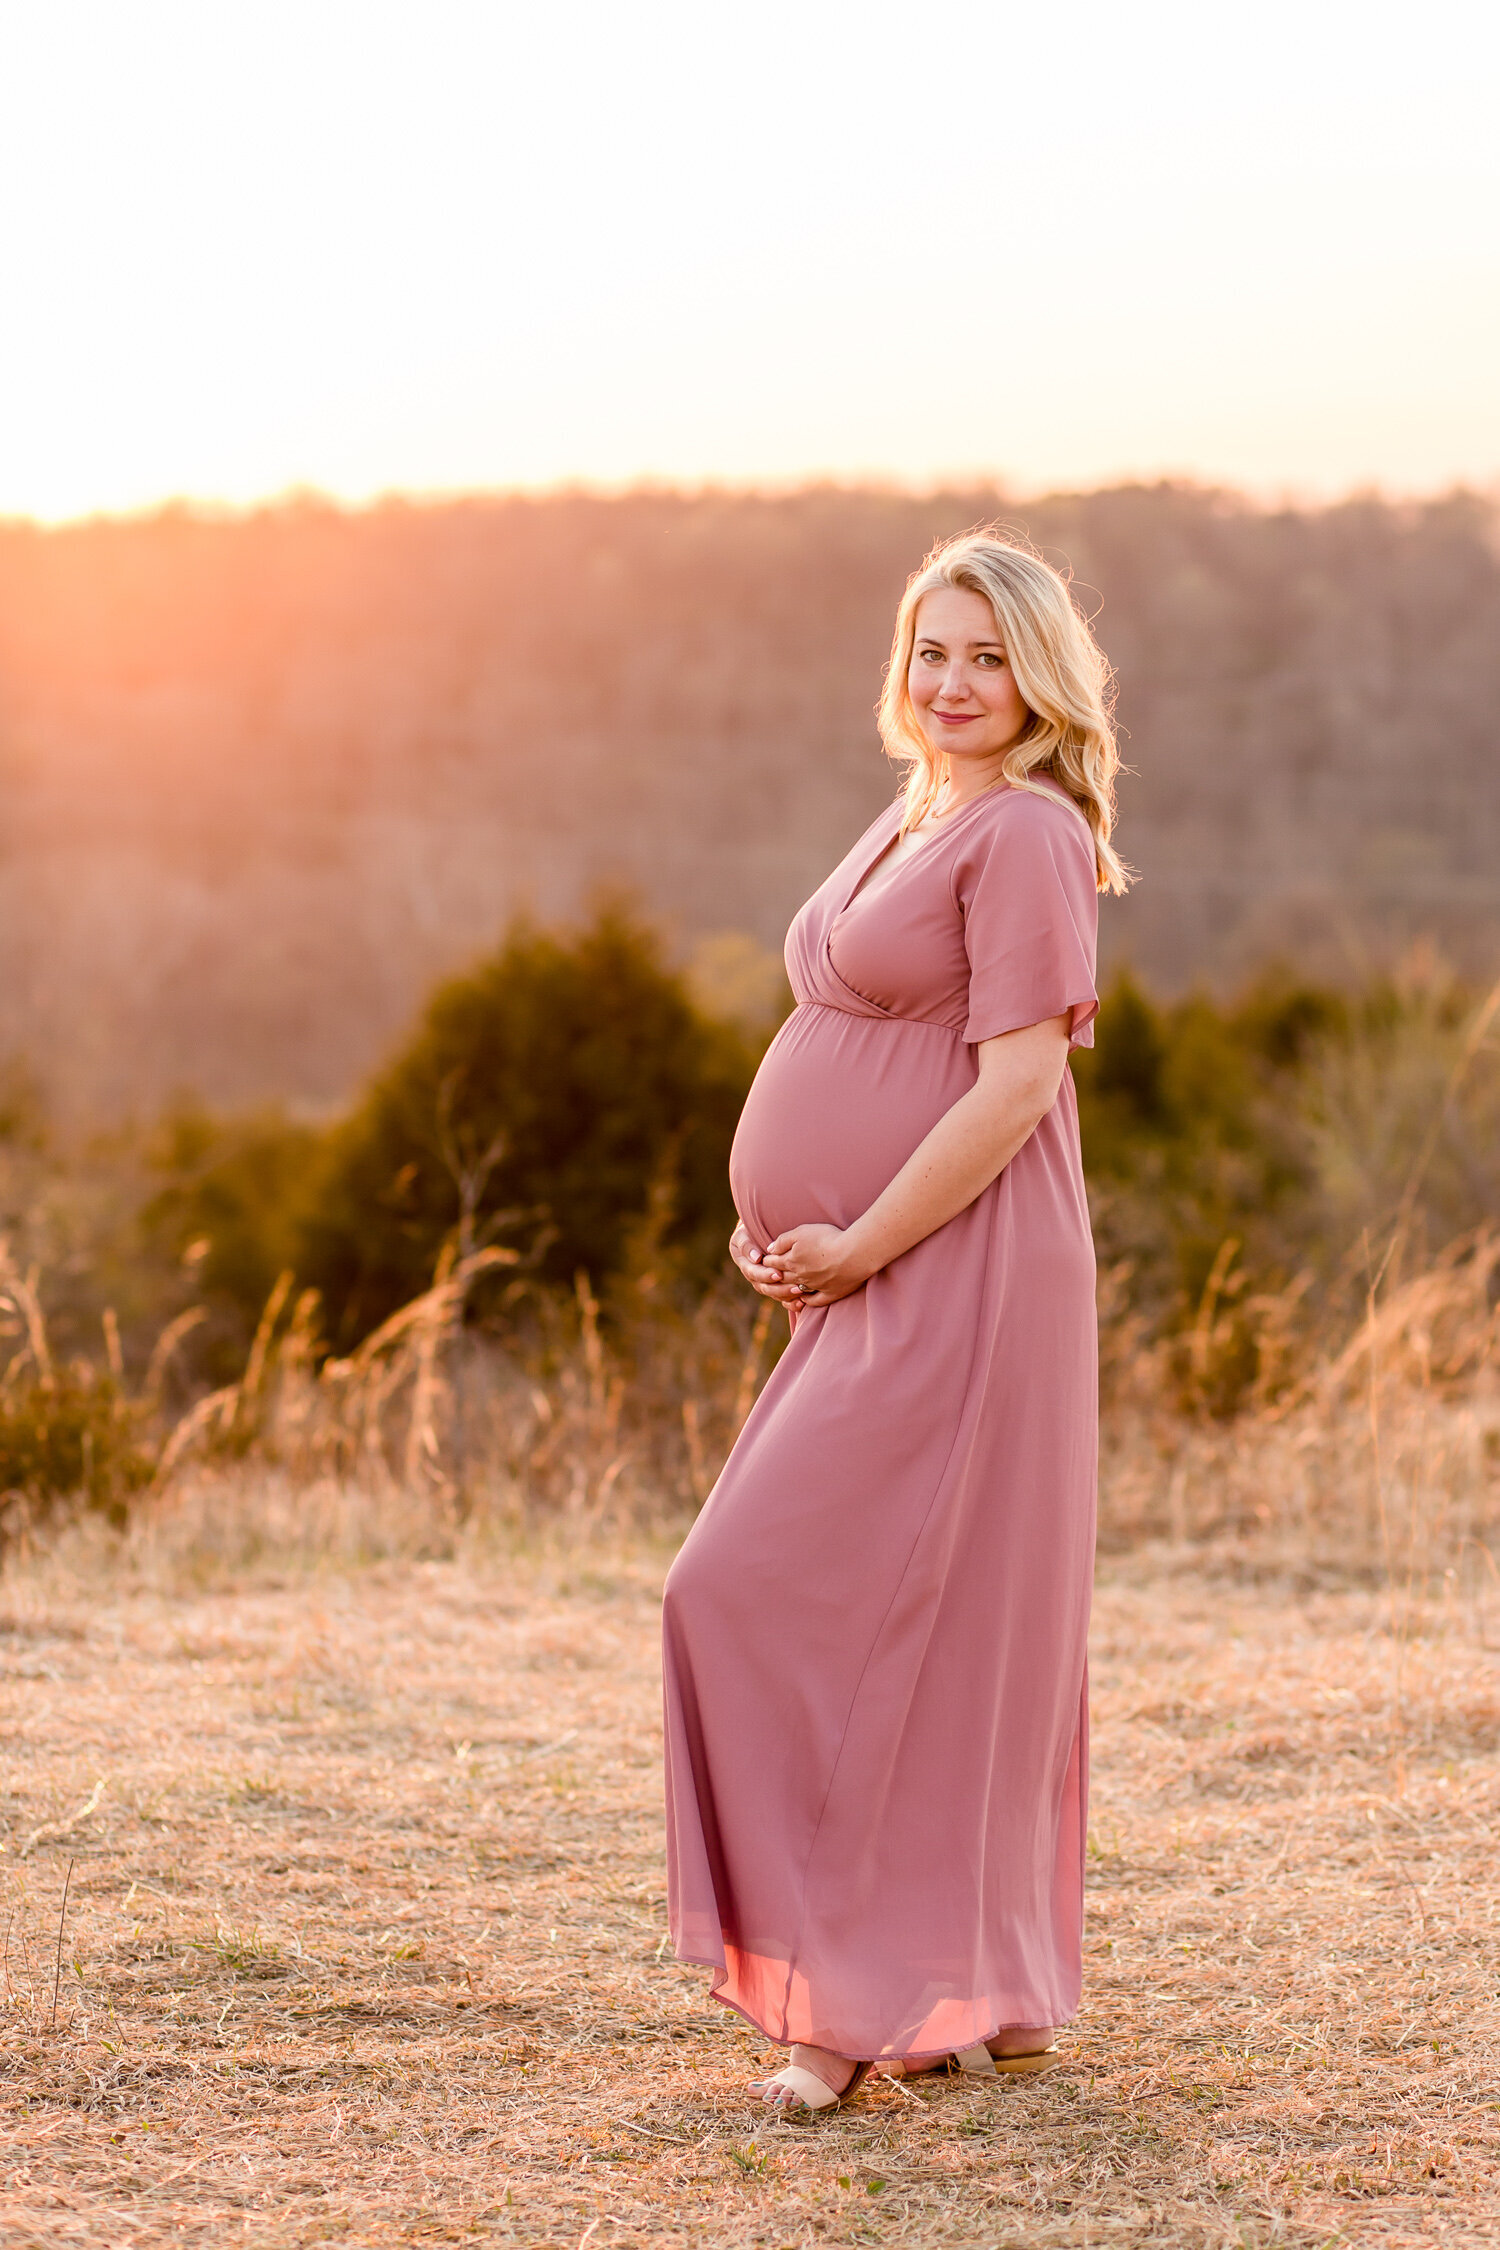 Outdoor_maternity_photography_session_Louisville_KY_photographer-4